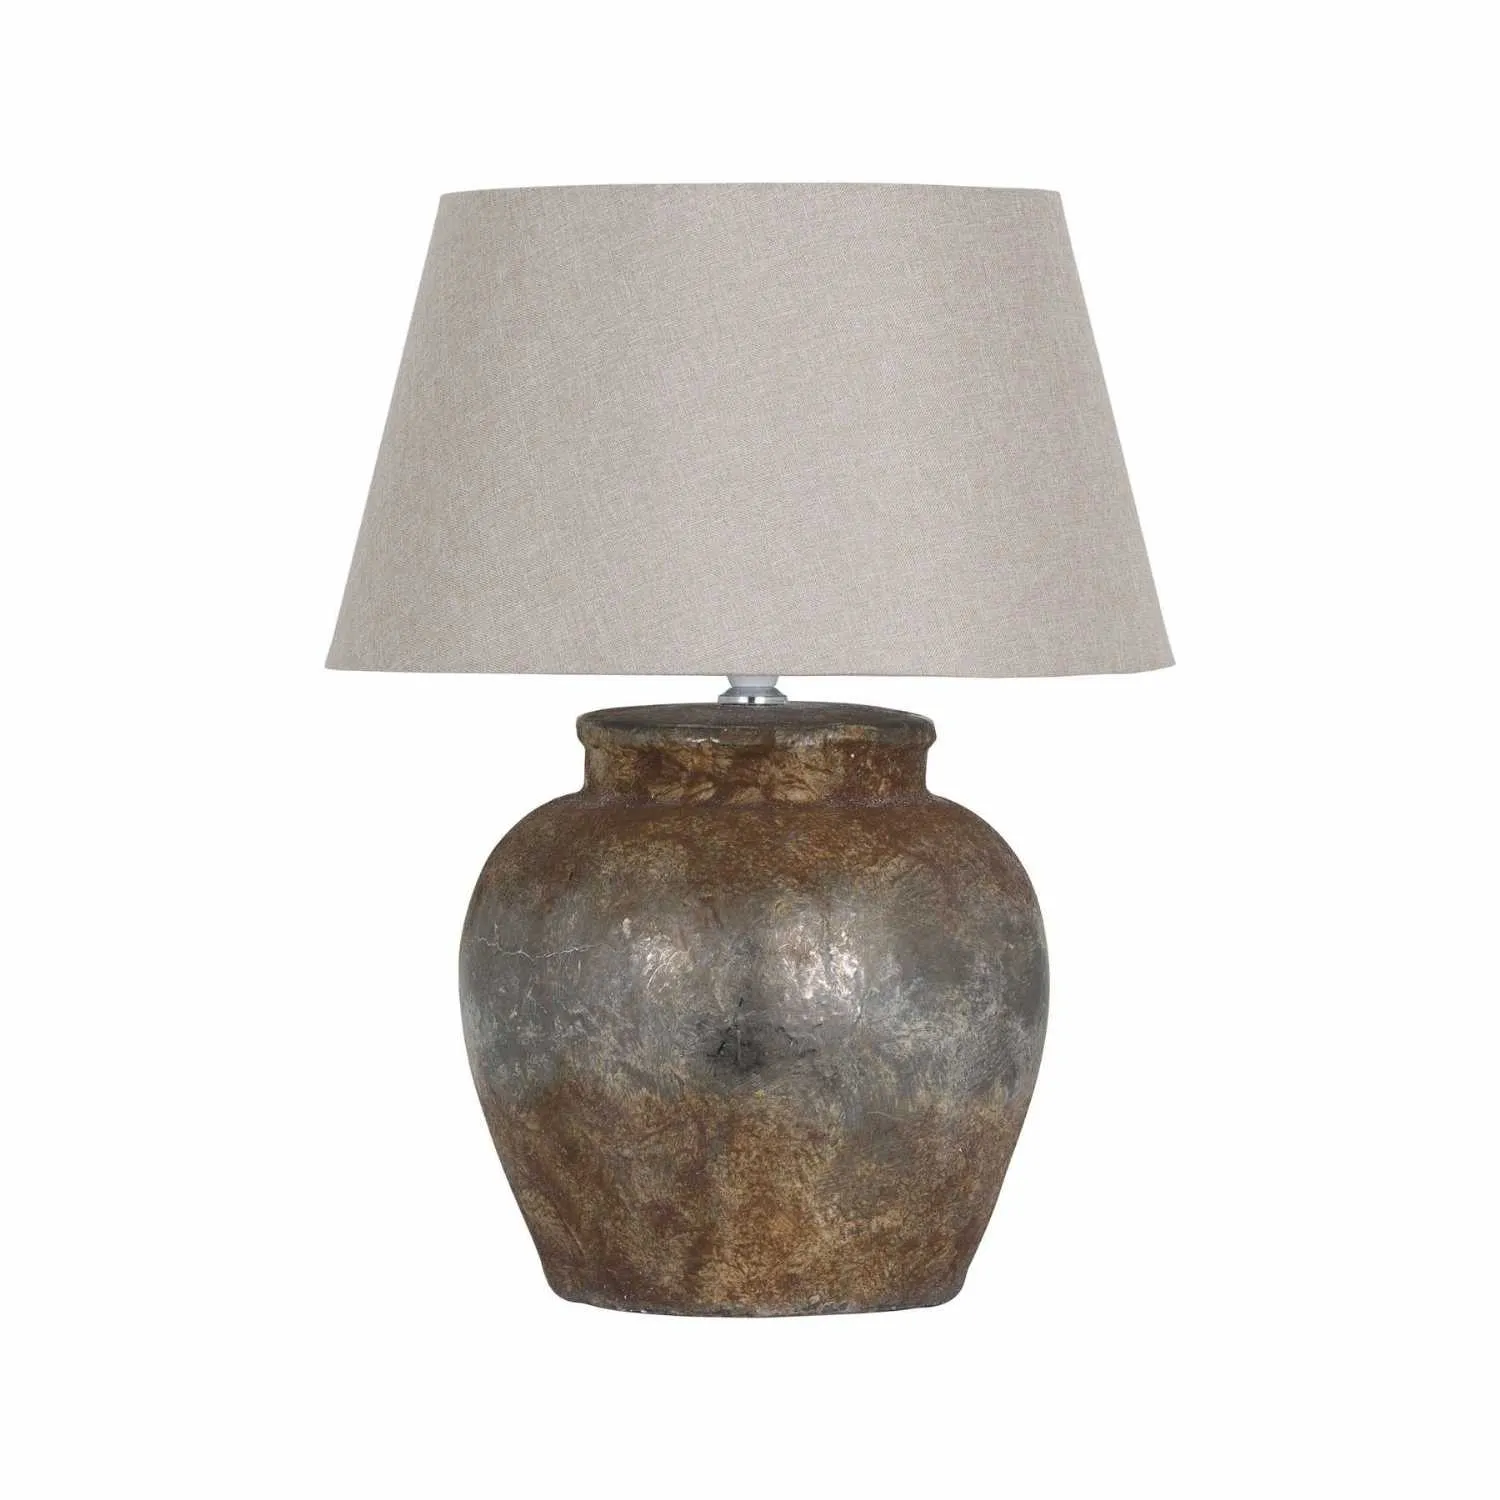 Round Shaped Aged Beige and Black Stone Ceramic Table Lamp Beige Linen Shade